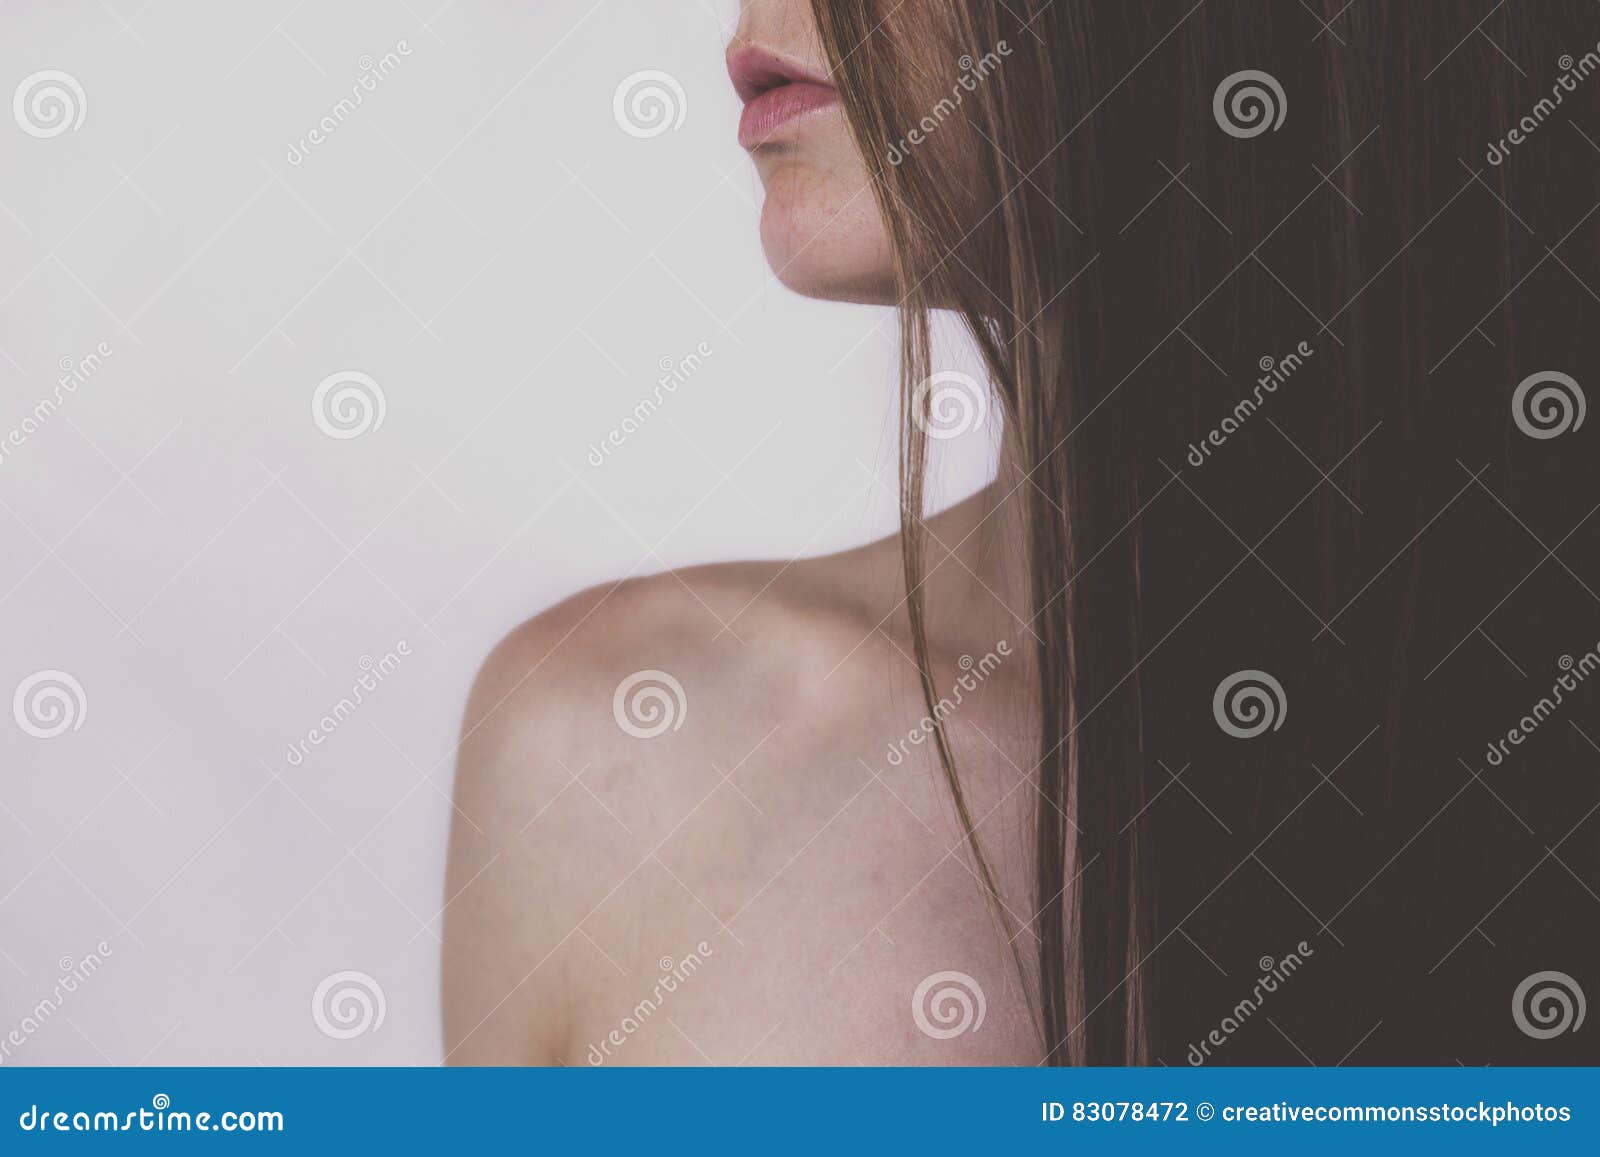 Woman In Naked Figure Picture